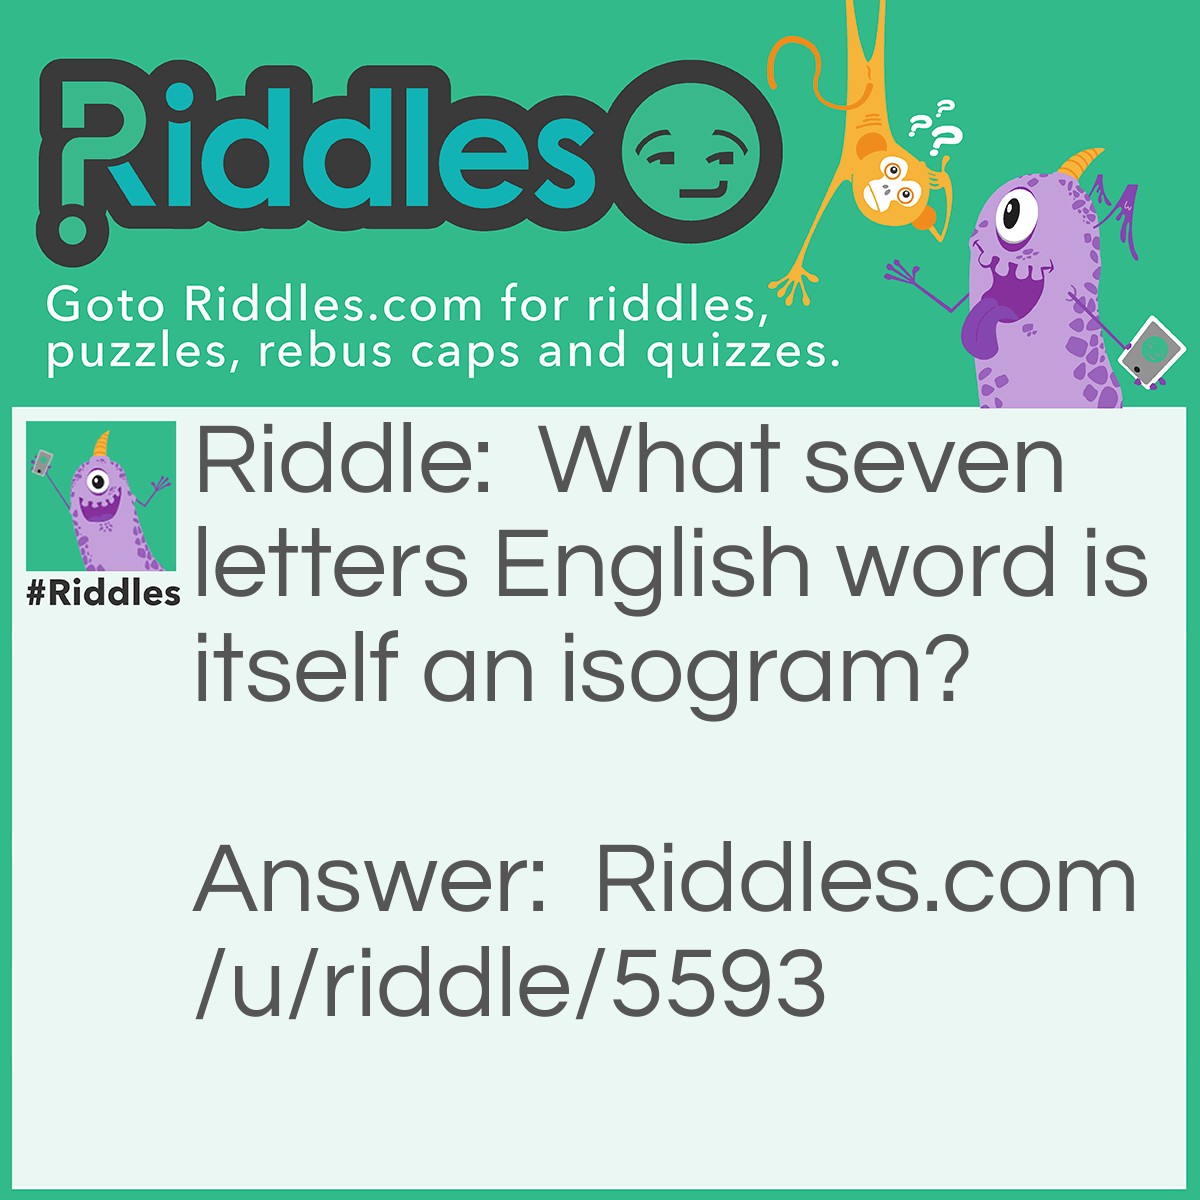 Riddle: What seven letters English word is itself an isogram? Answer: The word "Isogram".